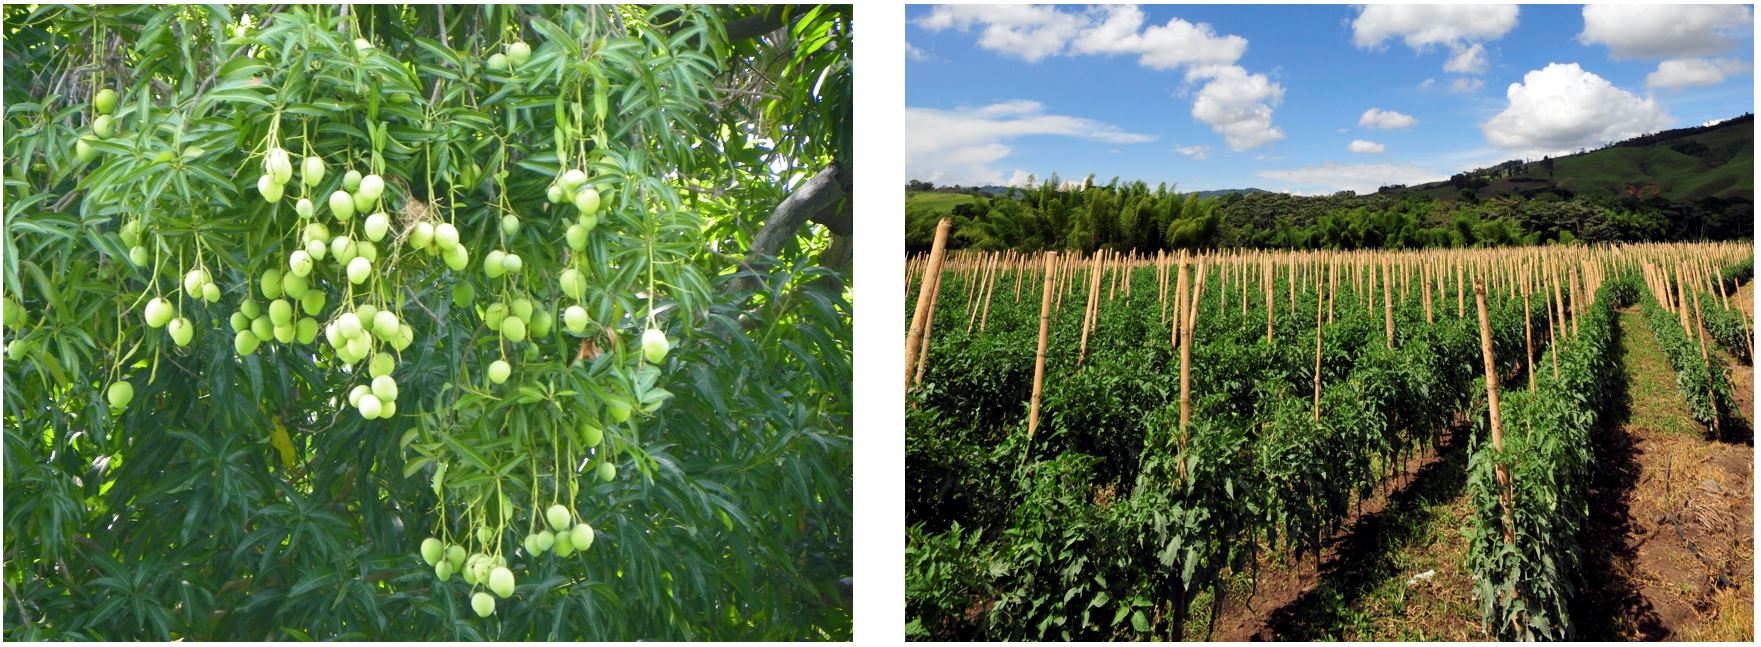  Avocados Hanging from Tree, J. Stephen Conn ; Tomato Crops, Neil Palmer (CIAT) 